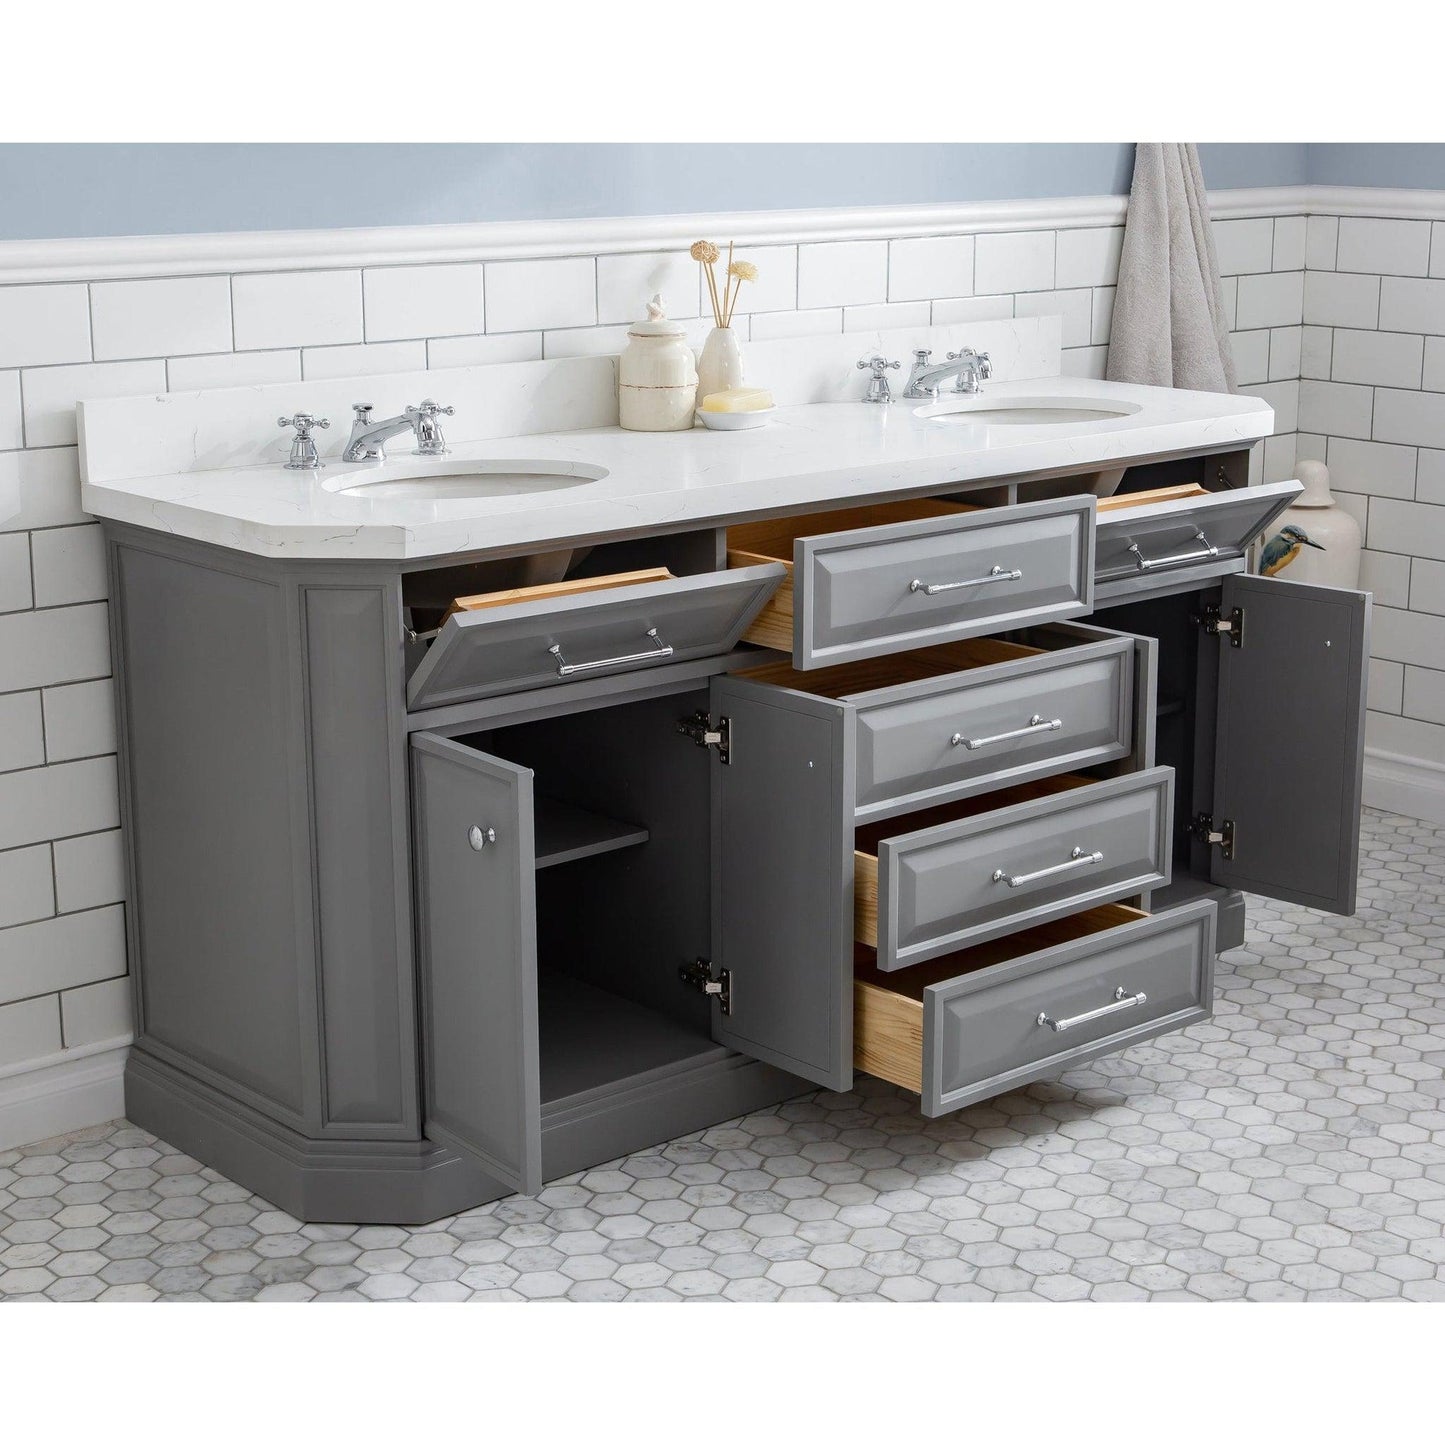 Water Creation Palace 72" Quartz Carrara Cashmere Grey Bathroom Vanity Set With Hardware And F2-0009 Faucets in Chrome Finish